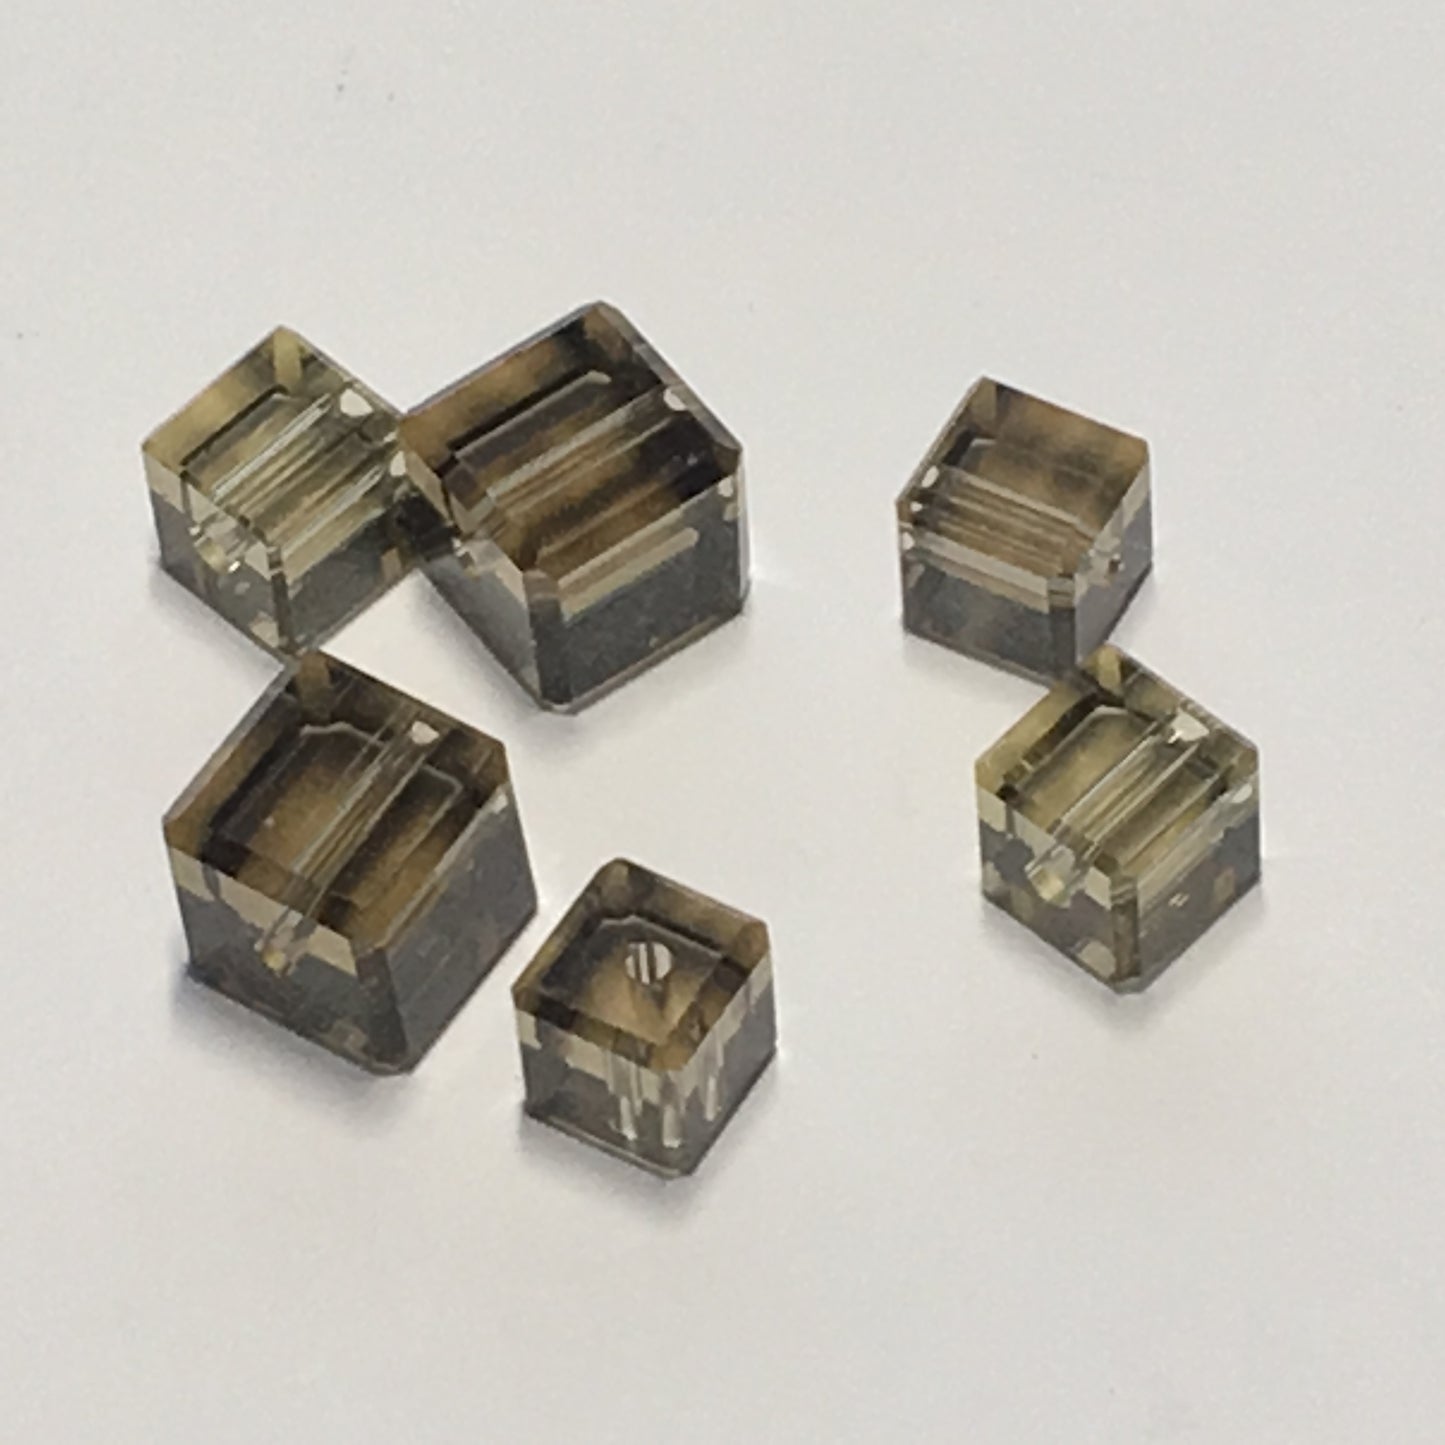 Transparent Gray Crystal Faceted Cube / Square Beads, 5 and 7 mm, 6 Beads